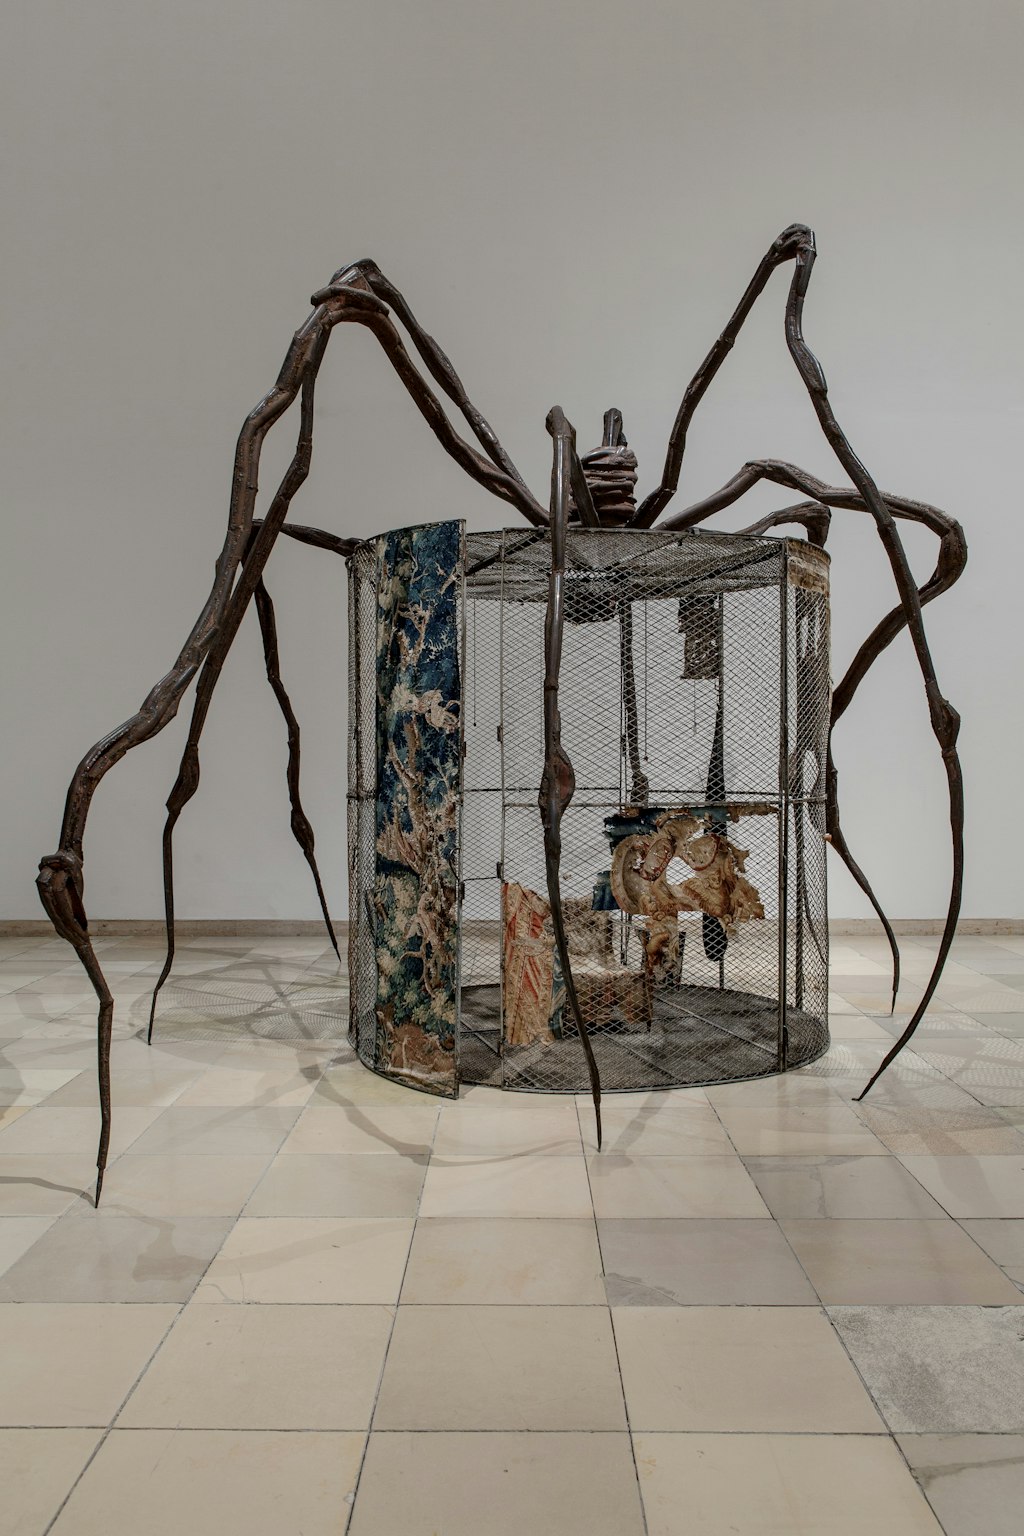 A large bronze sculpture of a spider on top of a tall cage. Inside the cage are textiles and other objects.